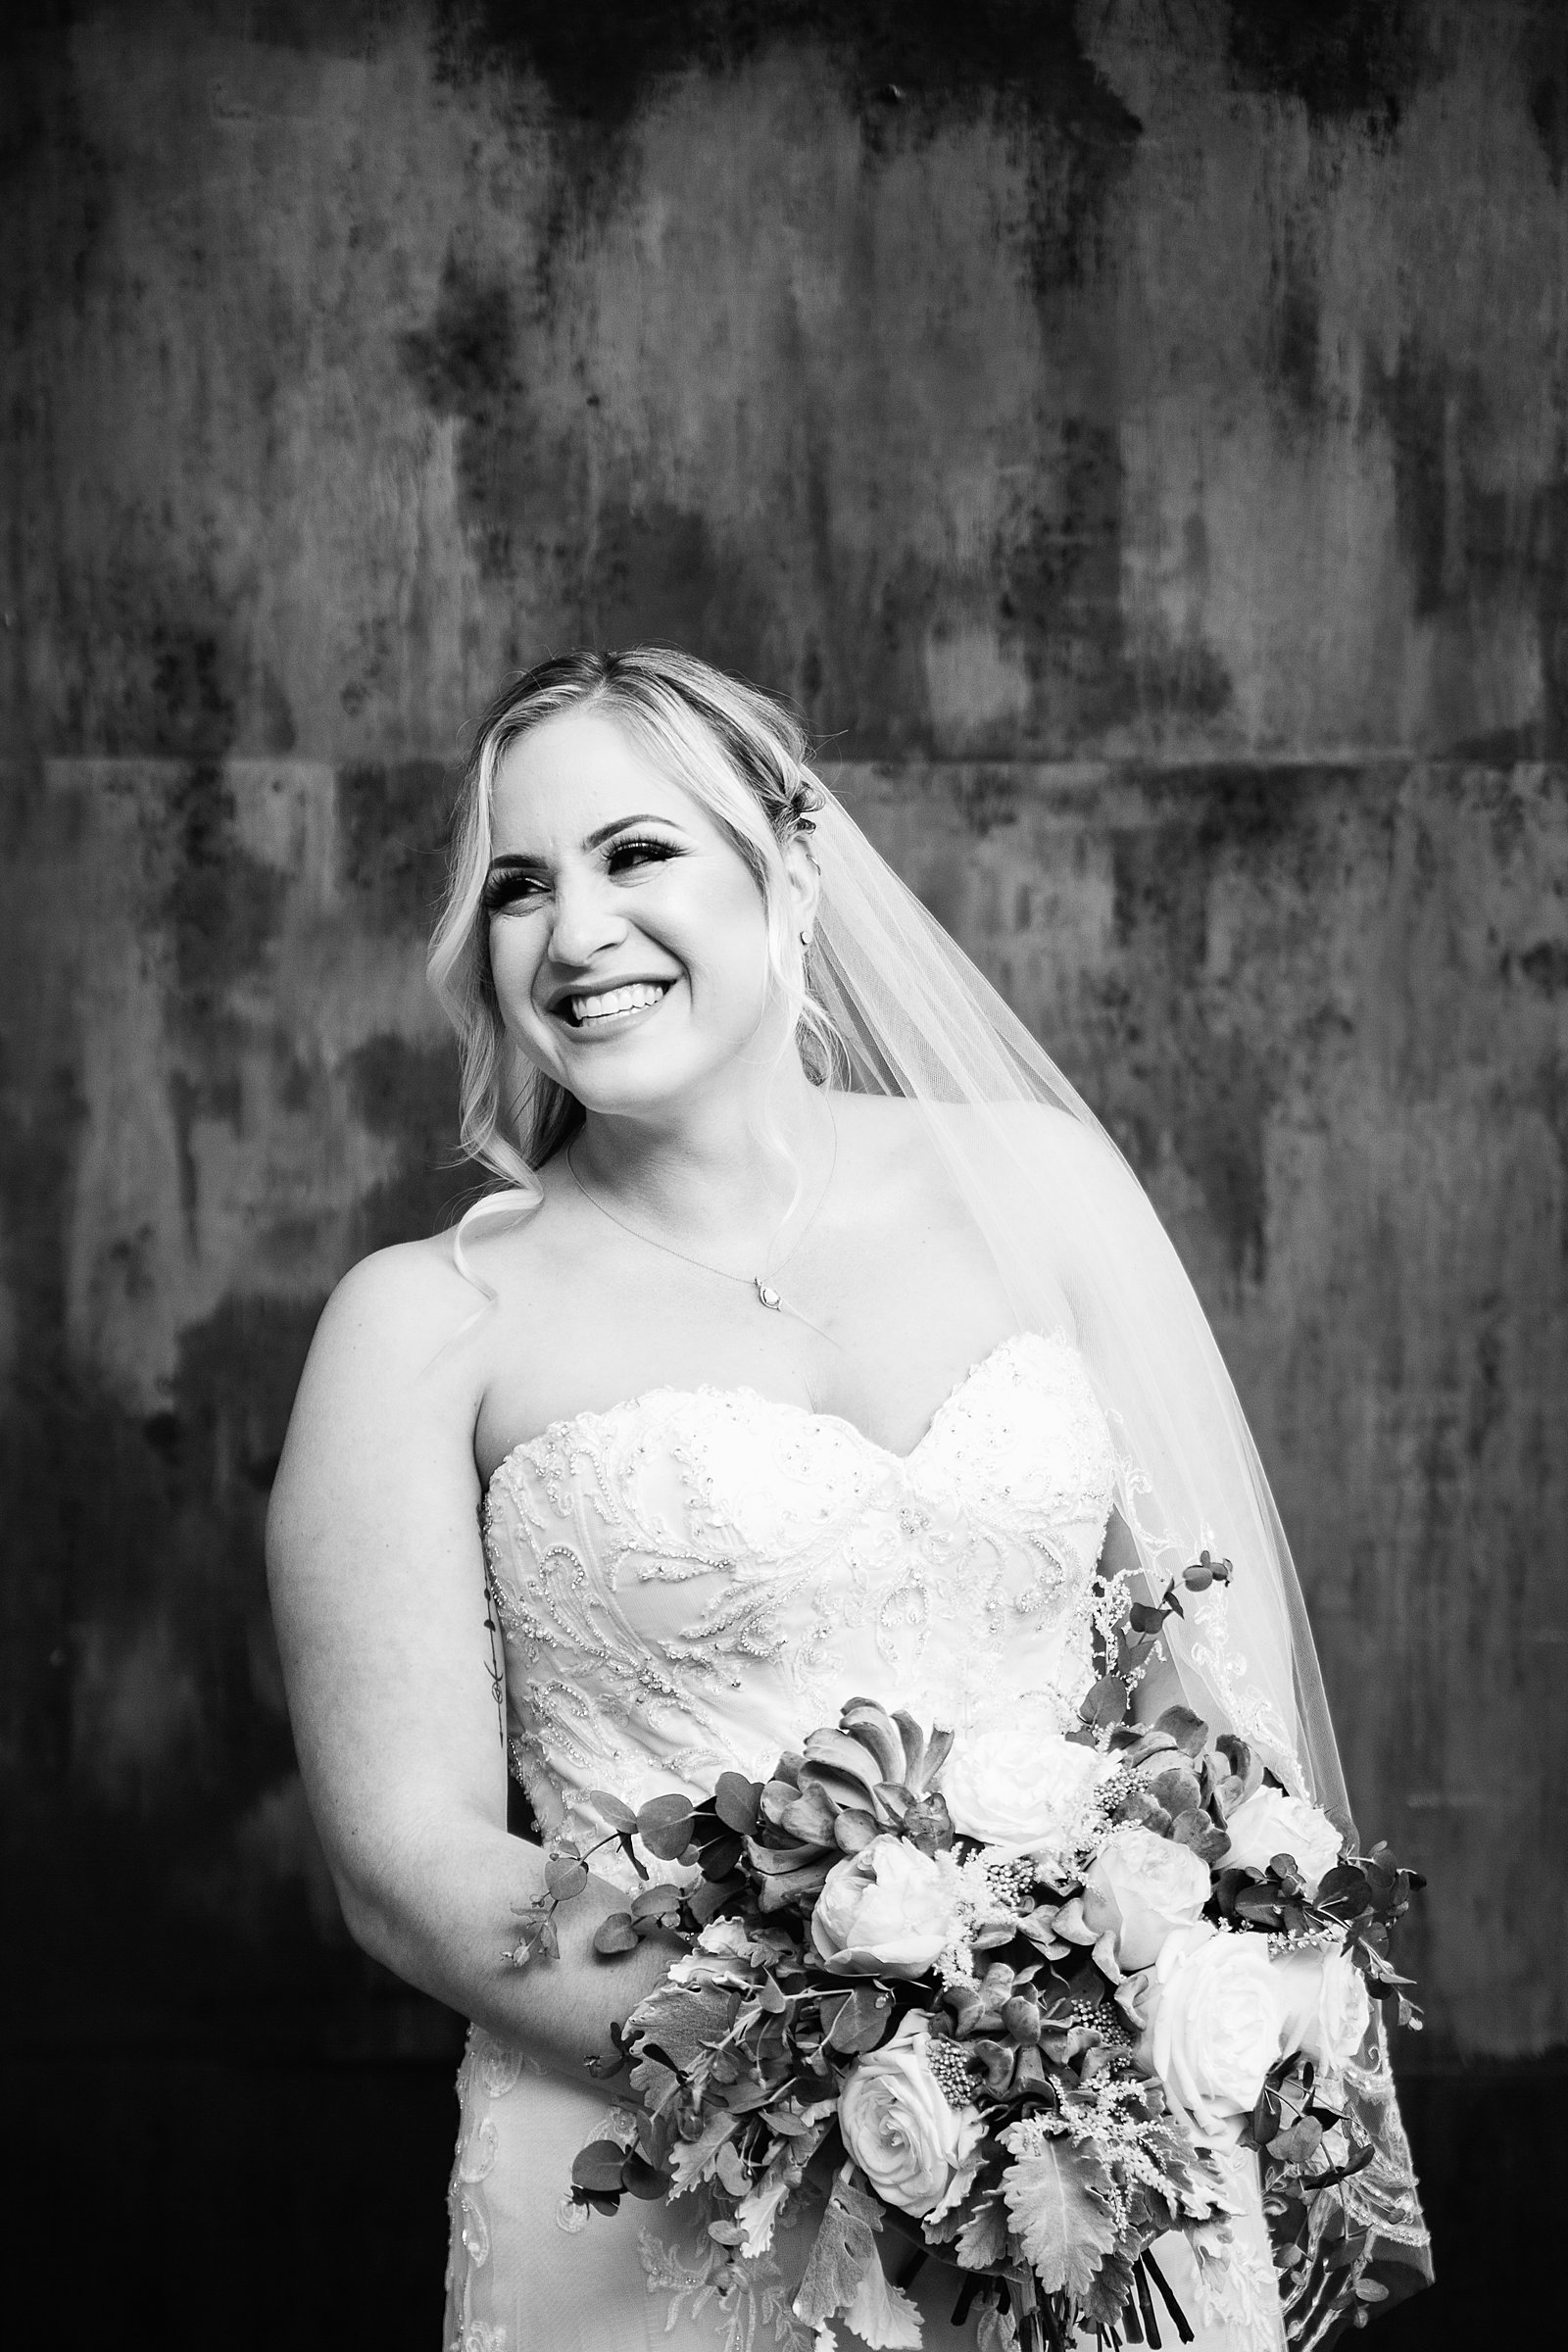 Bride in a romantic wedding dress with a succulent bouquet laughing on her wedding day by Phoenix wedding photographer PMA Photography.